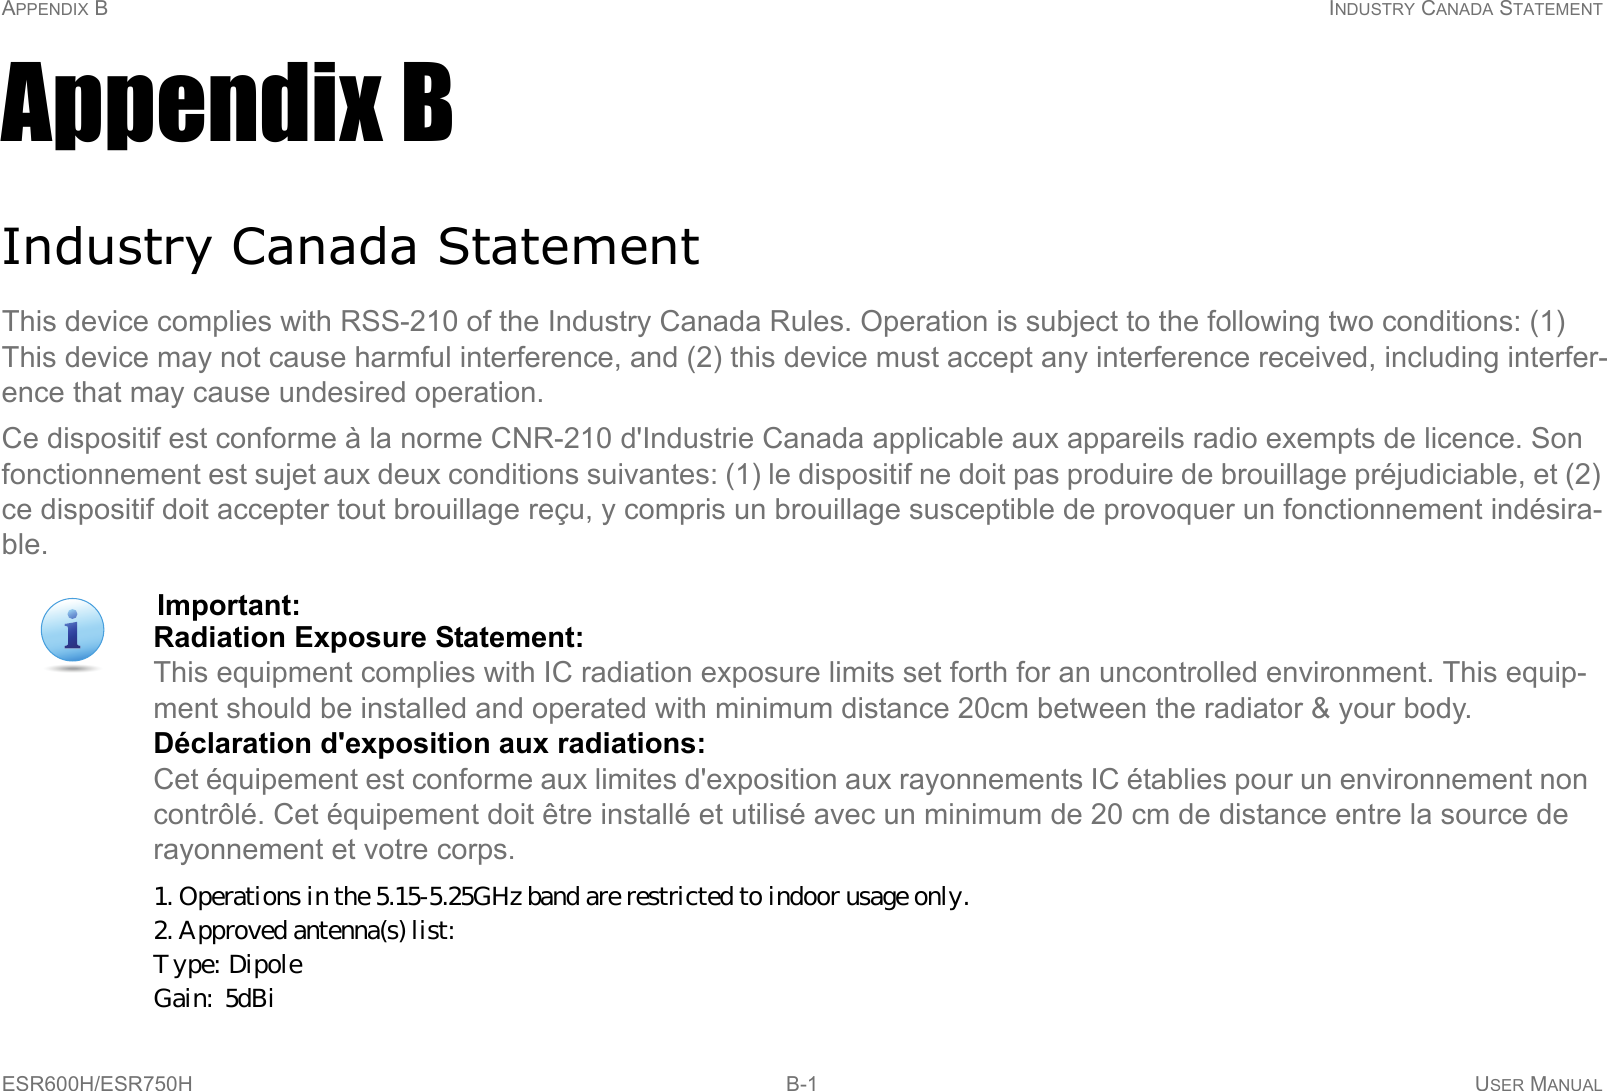 APPENDIX B INDUSTRY CANADA STATEMENTESR600H/ESR750H B-1 USER MANUALAppendix BIndustry Canada StatementThis device complies with RSS-210 of the Industry Canada Rules. Operation is subject to the following two conditions: (1) This device may not cause harmful interference, and (2) this device must accept any interference received, including interfer-ence that may cause undesired operation.Ce dispositif est conforme à la norme CNR-210 d&apos;Industrie Canada applicable aux appareils radio exempts de licence. Son fonctionnement est sujet aux deux conditions suivantes: (1) le dispositif ne doit pas produire de brouillage préjudiciable, et (2) ce dispositif doit accepter tout brouillage reçu, y compris un brouillage susceptible de provoquer un fonctionnement indésira-ble.Important:Radiation Exposure Statement: This equipment complies with IC radiation exposure limits set forth for an uncontrolled environment. This equip-ment should be installed and operated with minimum distance 20cm between the radiator &amp; your body.Déclaration d&apos;exposition aux radiations: Cet équipement est conforme aux limites d&apos;exposition aux rayonnements IC établies pour un environnement non contrôlé. Cet équipement doit être installé et utilisé avec un minimum de 20 cm de distance entre la source de rayonnement et votre corps.1. Operations in the 5.15-5.25GHz band are restricted to indoor usage only. 2. Approved antenna(s) list:  Type:  Dipole        Gain:  5dBi   